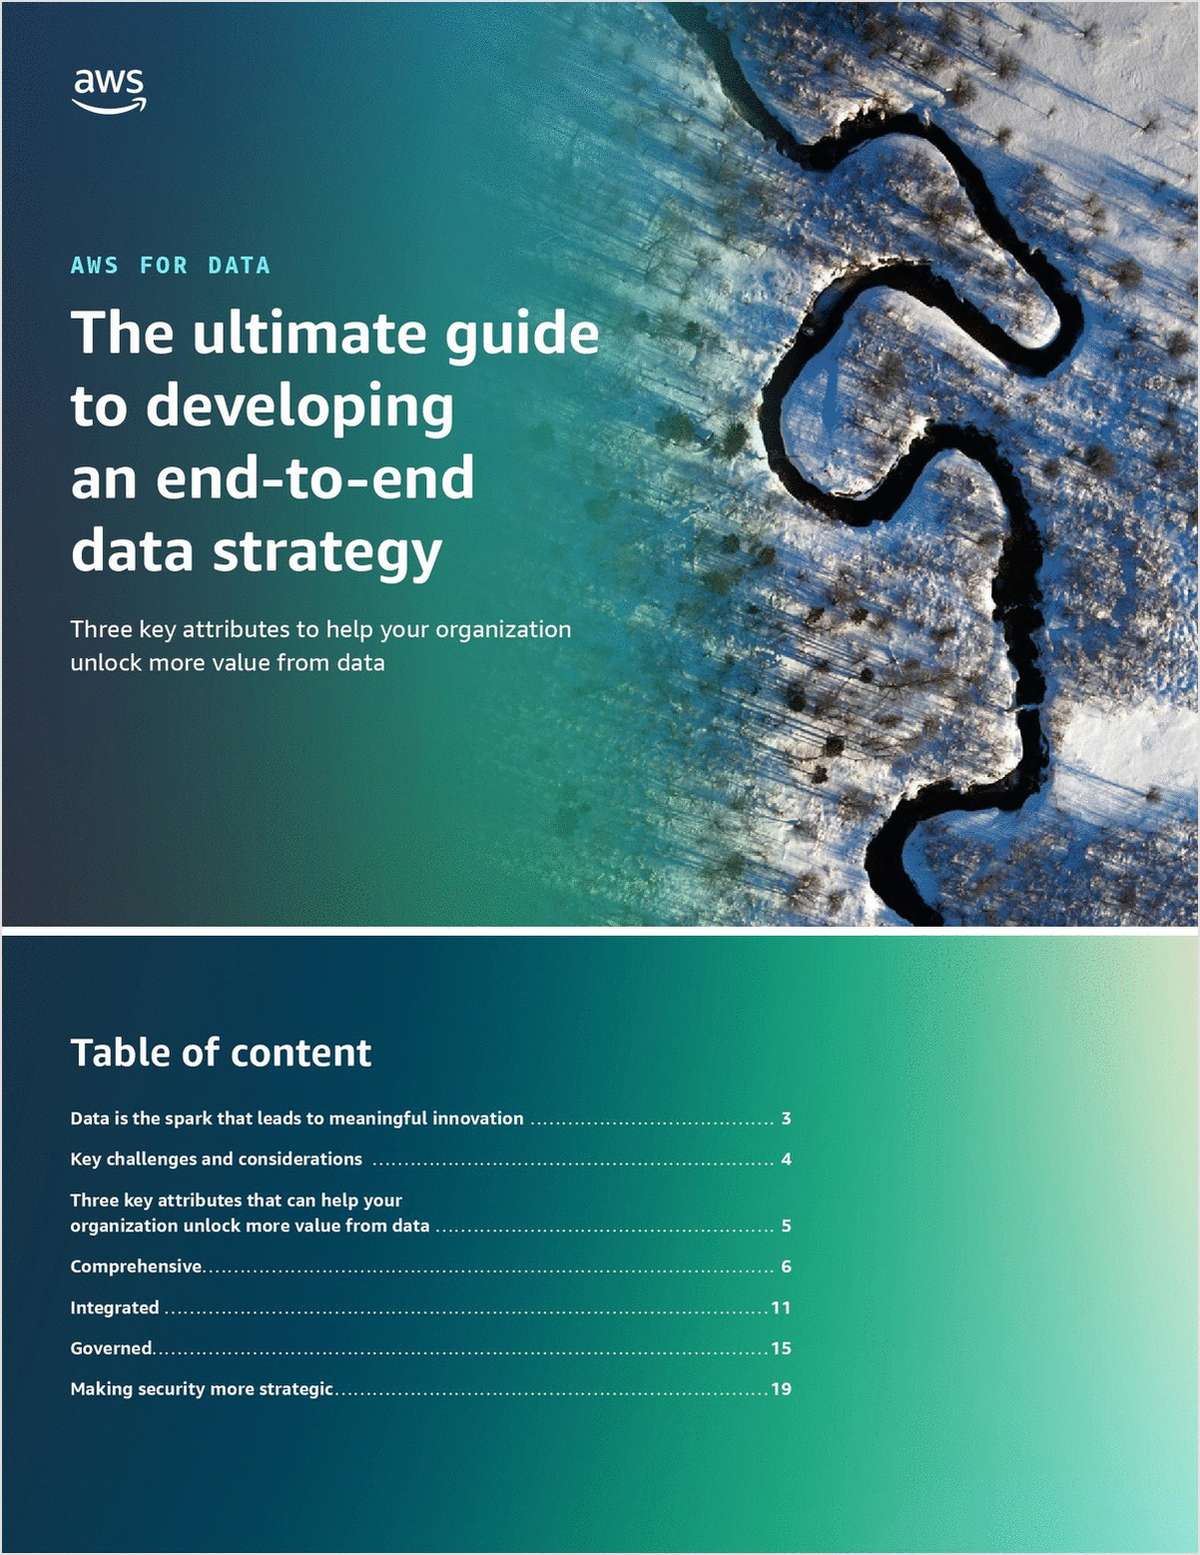 The Ultimate Guide to Developing an End-to-End Data Strategy